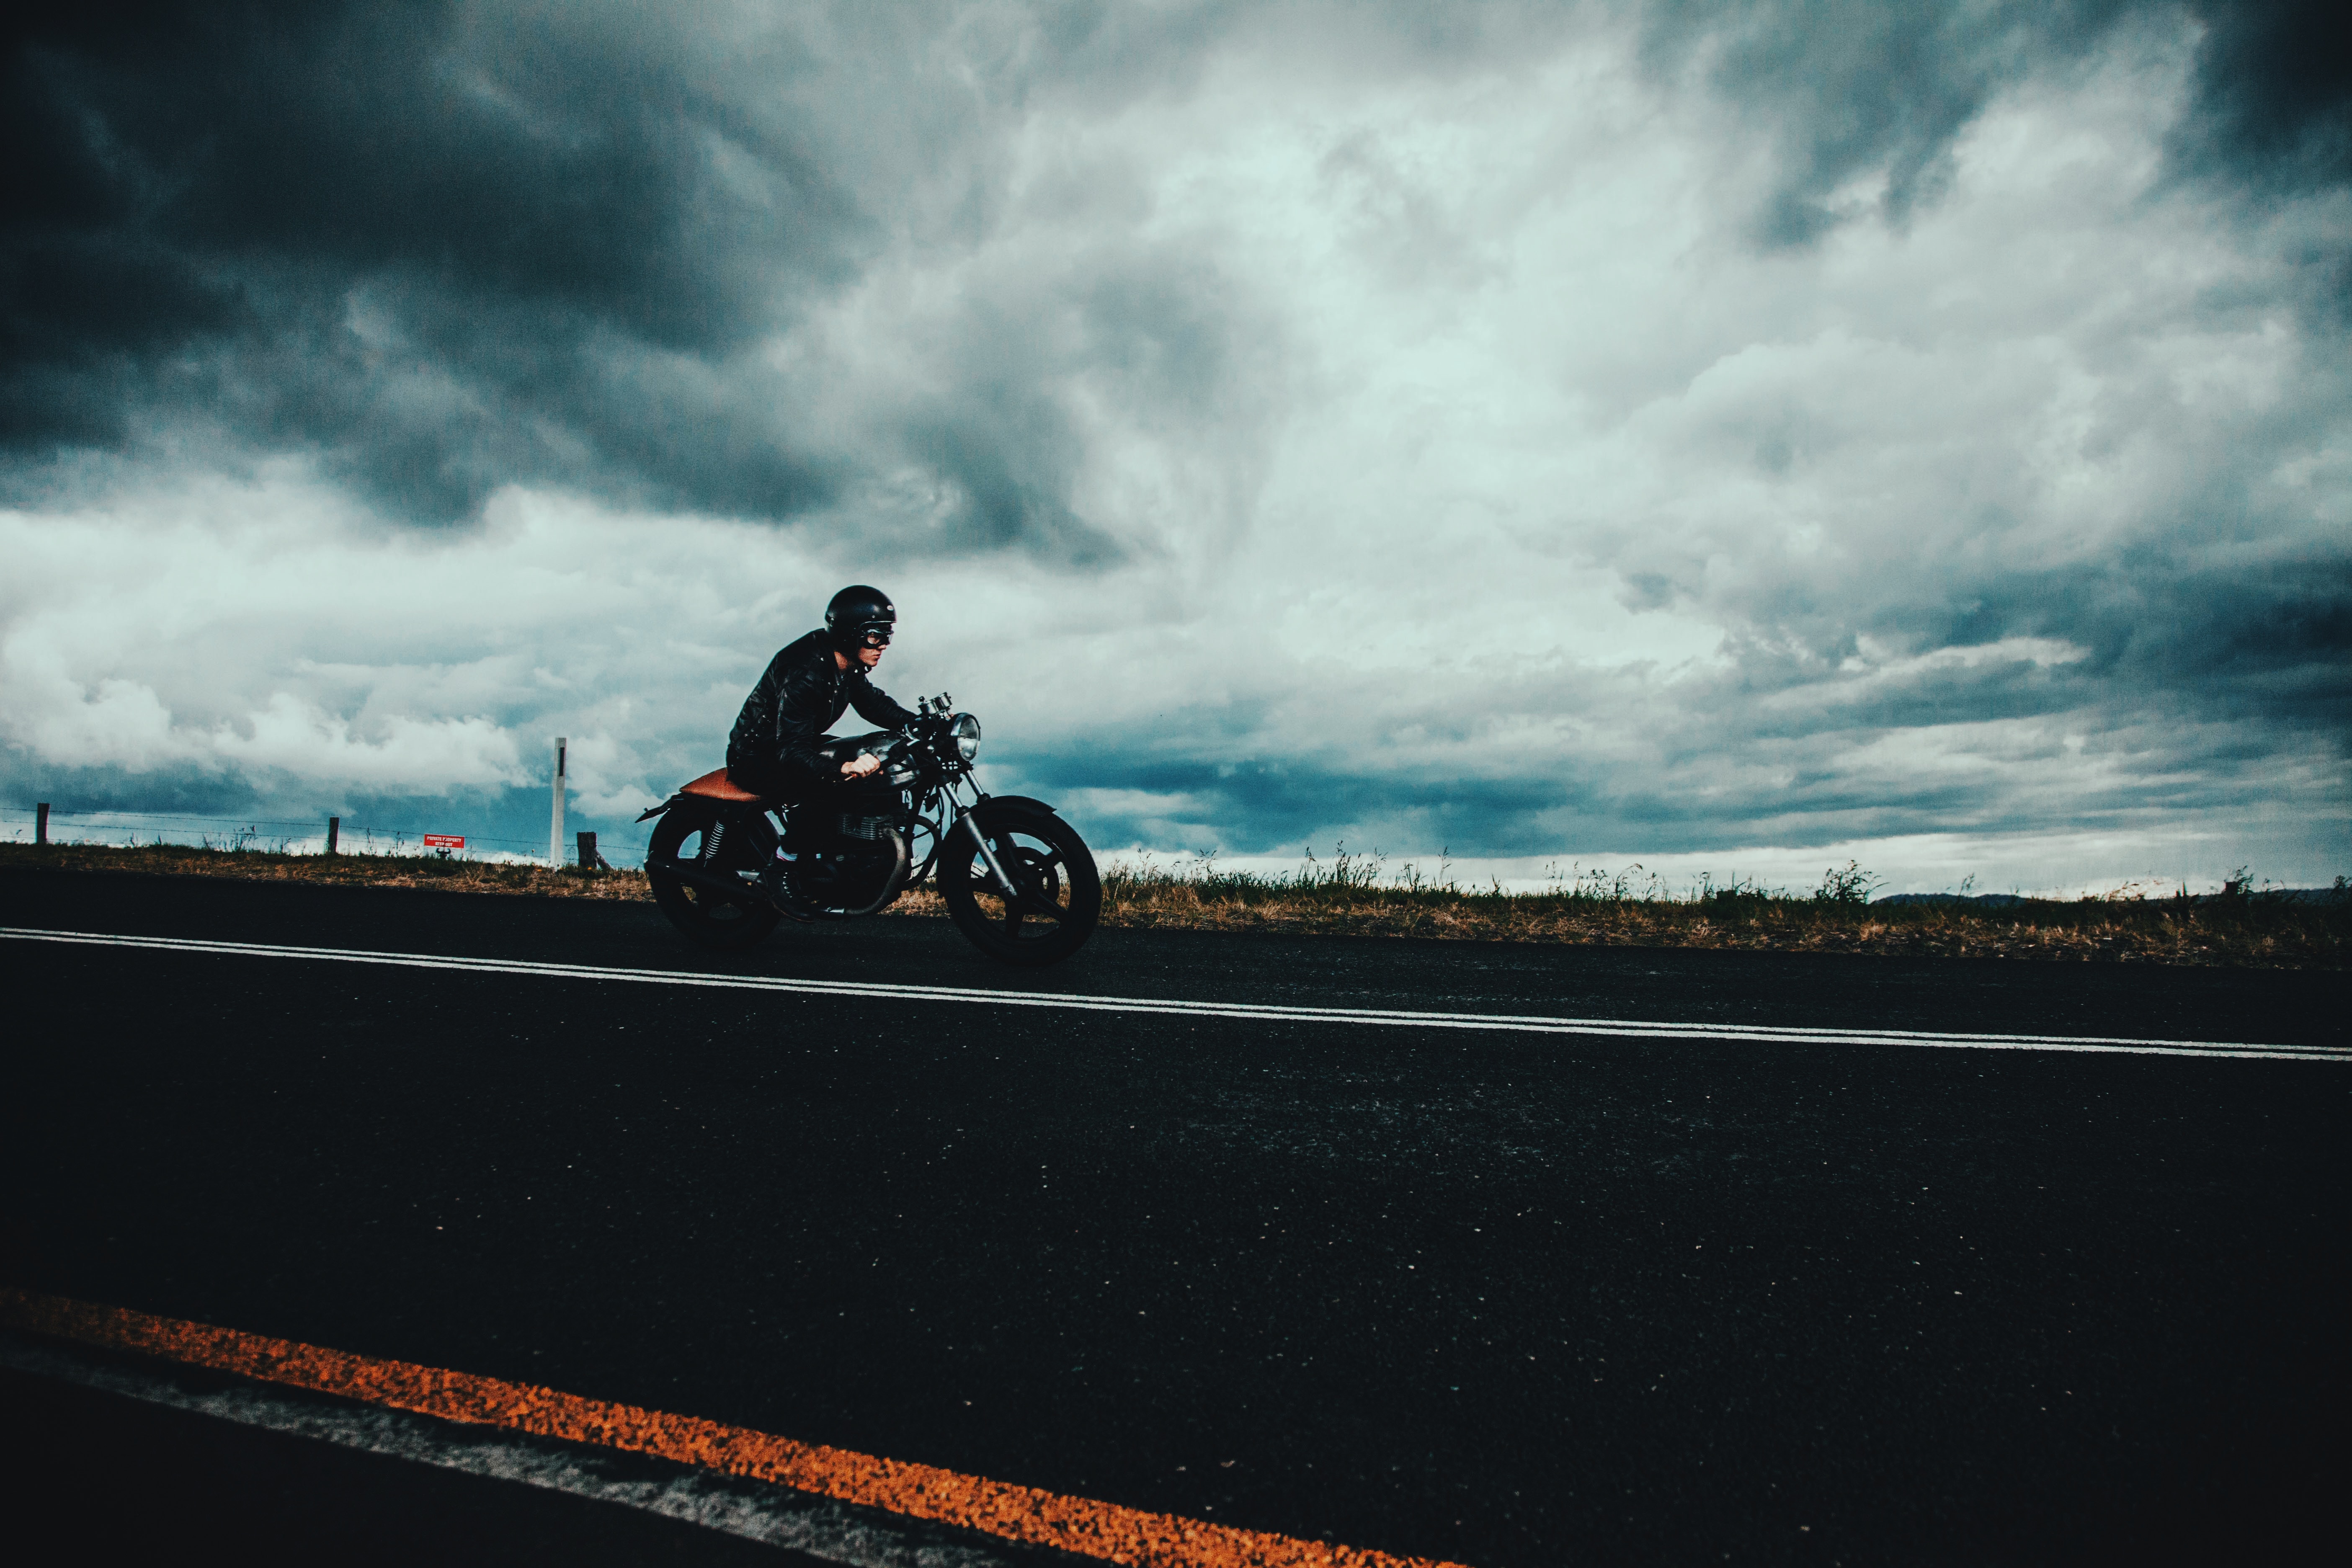 motorcyclist, clouds, motorcycles, road, markup, asphalt, helmet, mainly cloudy, overcast Free Stock Photo